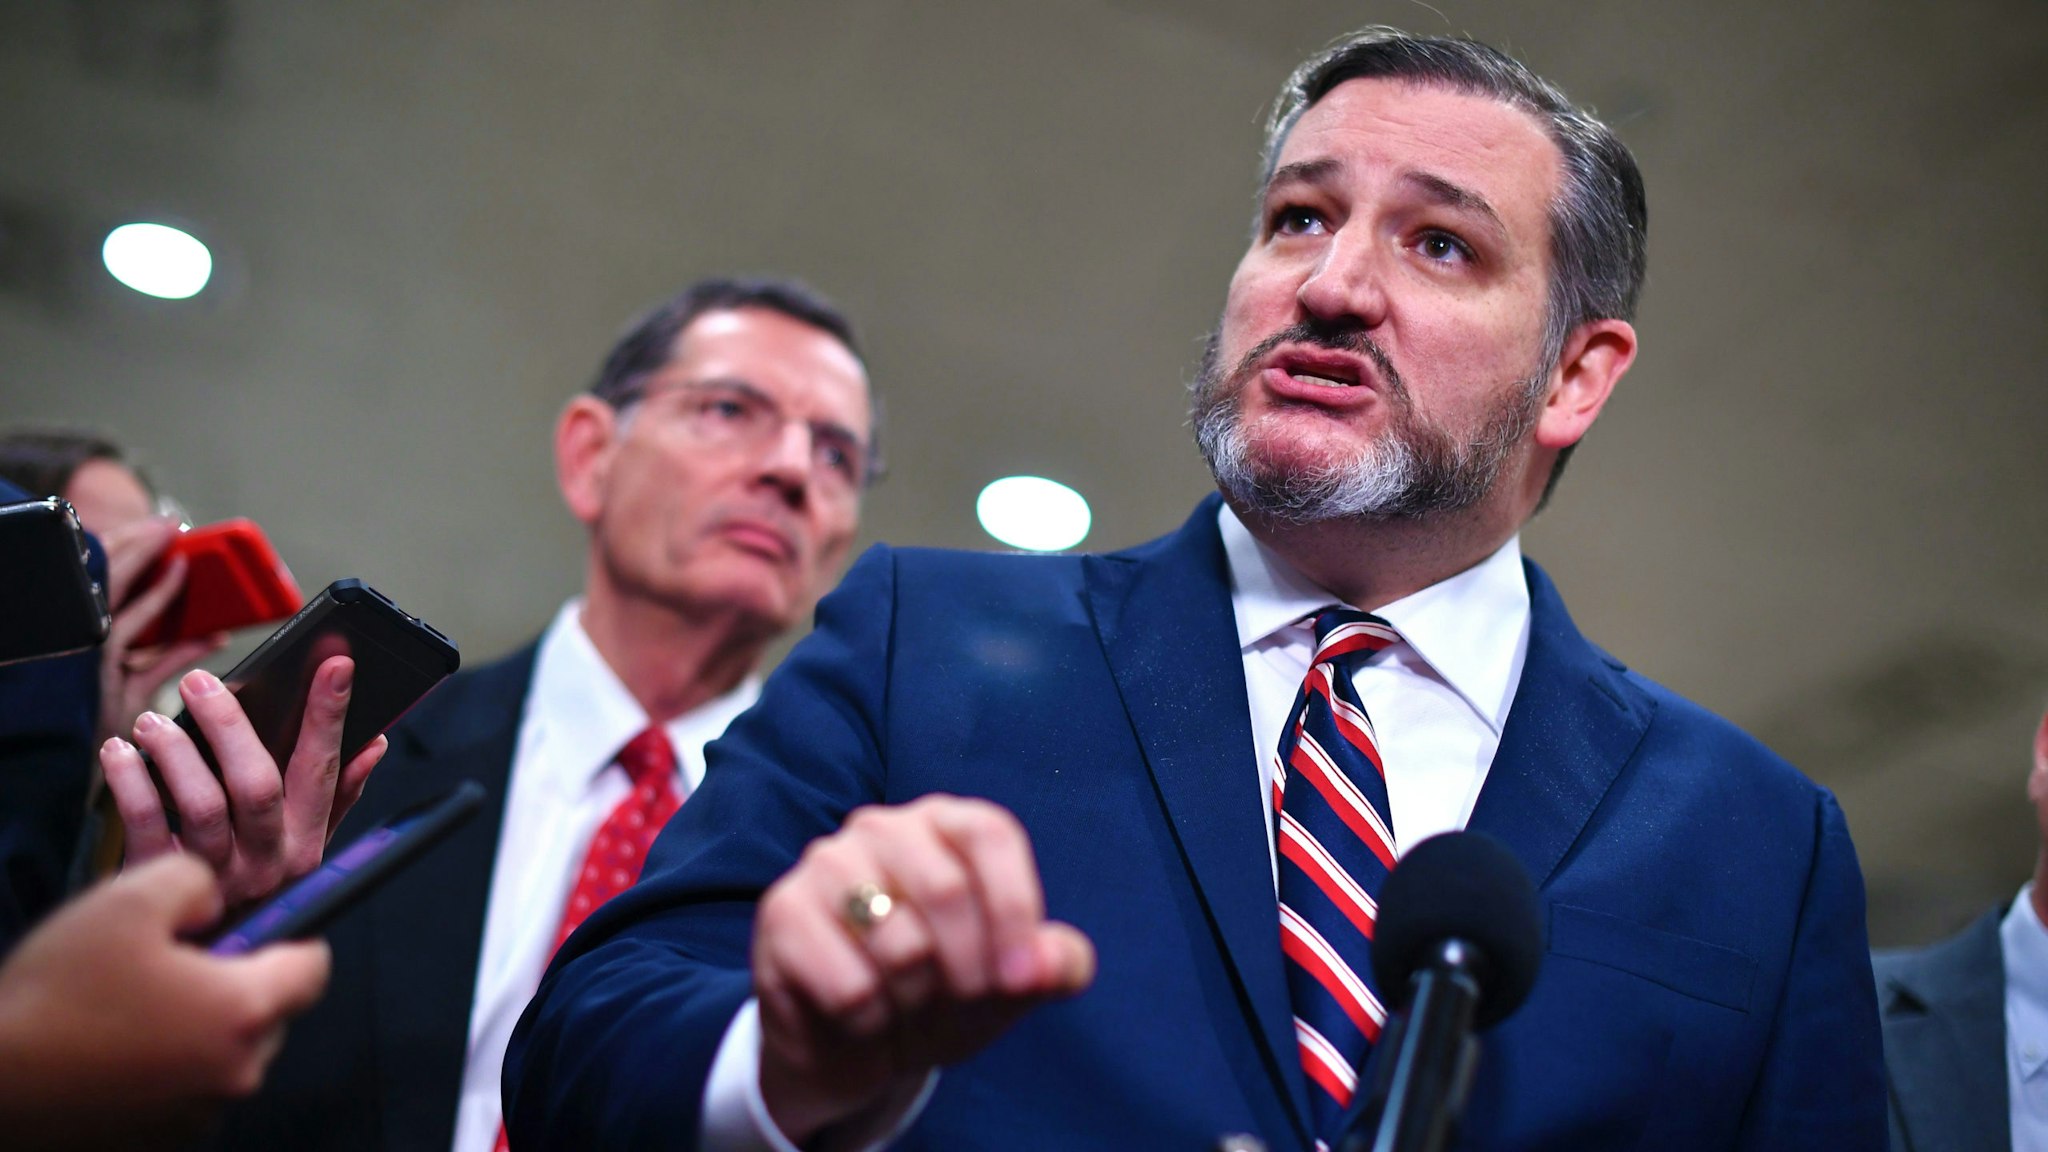 US Senator from Texas, Ted Cruz speaks to the media during a recess in the impeachment trial of US President Donald Trump at the US Capitol in Washington, DC on January 27, 2020. - White House lawyers were to resume their defense of President Donald Trump at his Senate impeachment trial Monday as explosive revelations from former national security advisor John Bolton increased pressure on Republicans to call him as a witness.